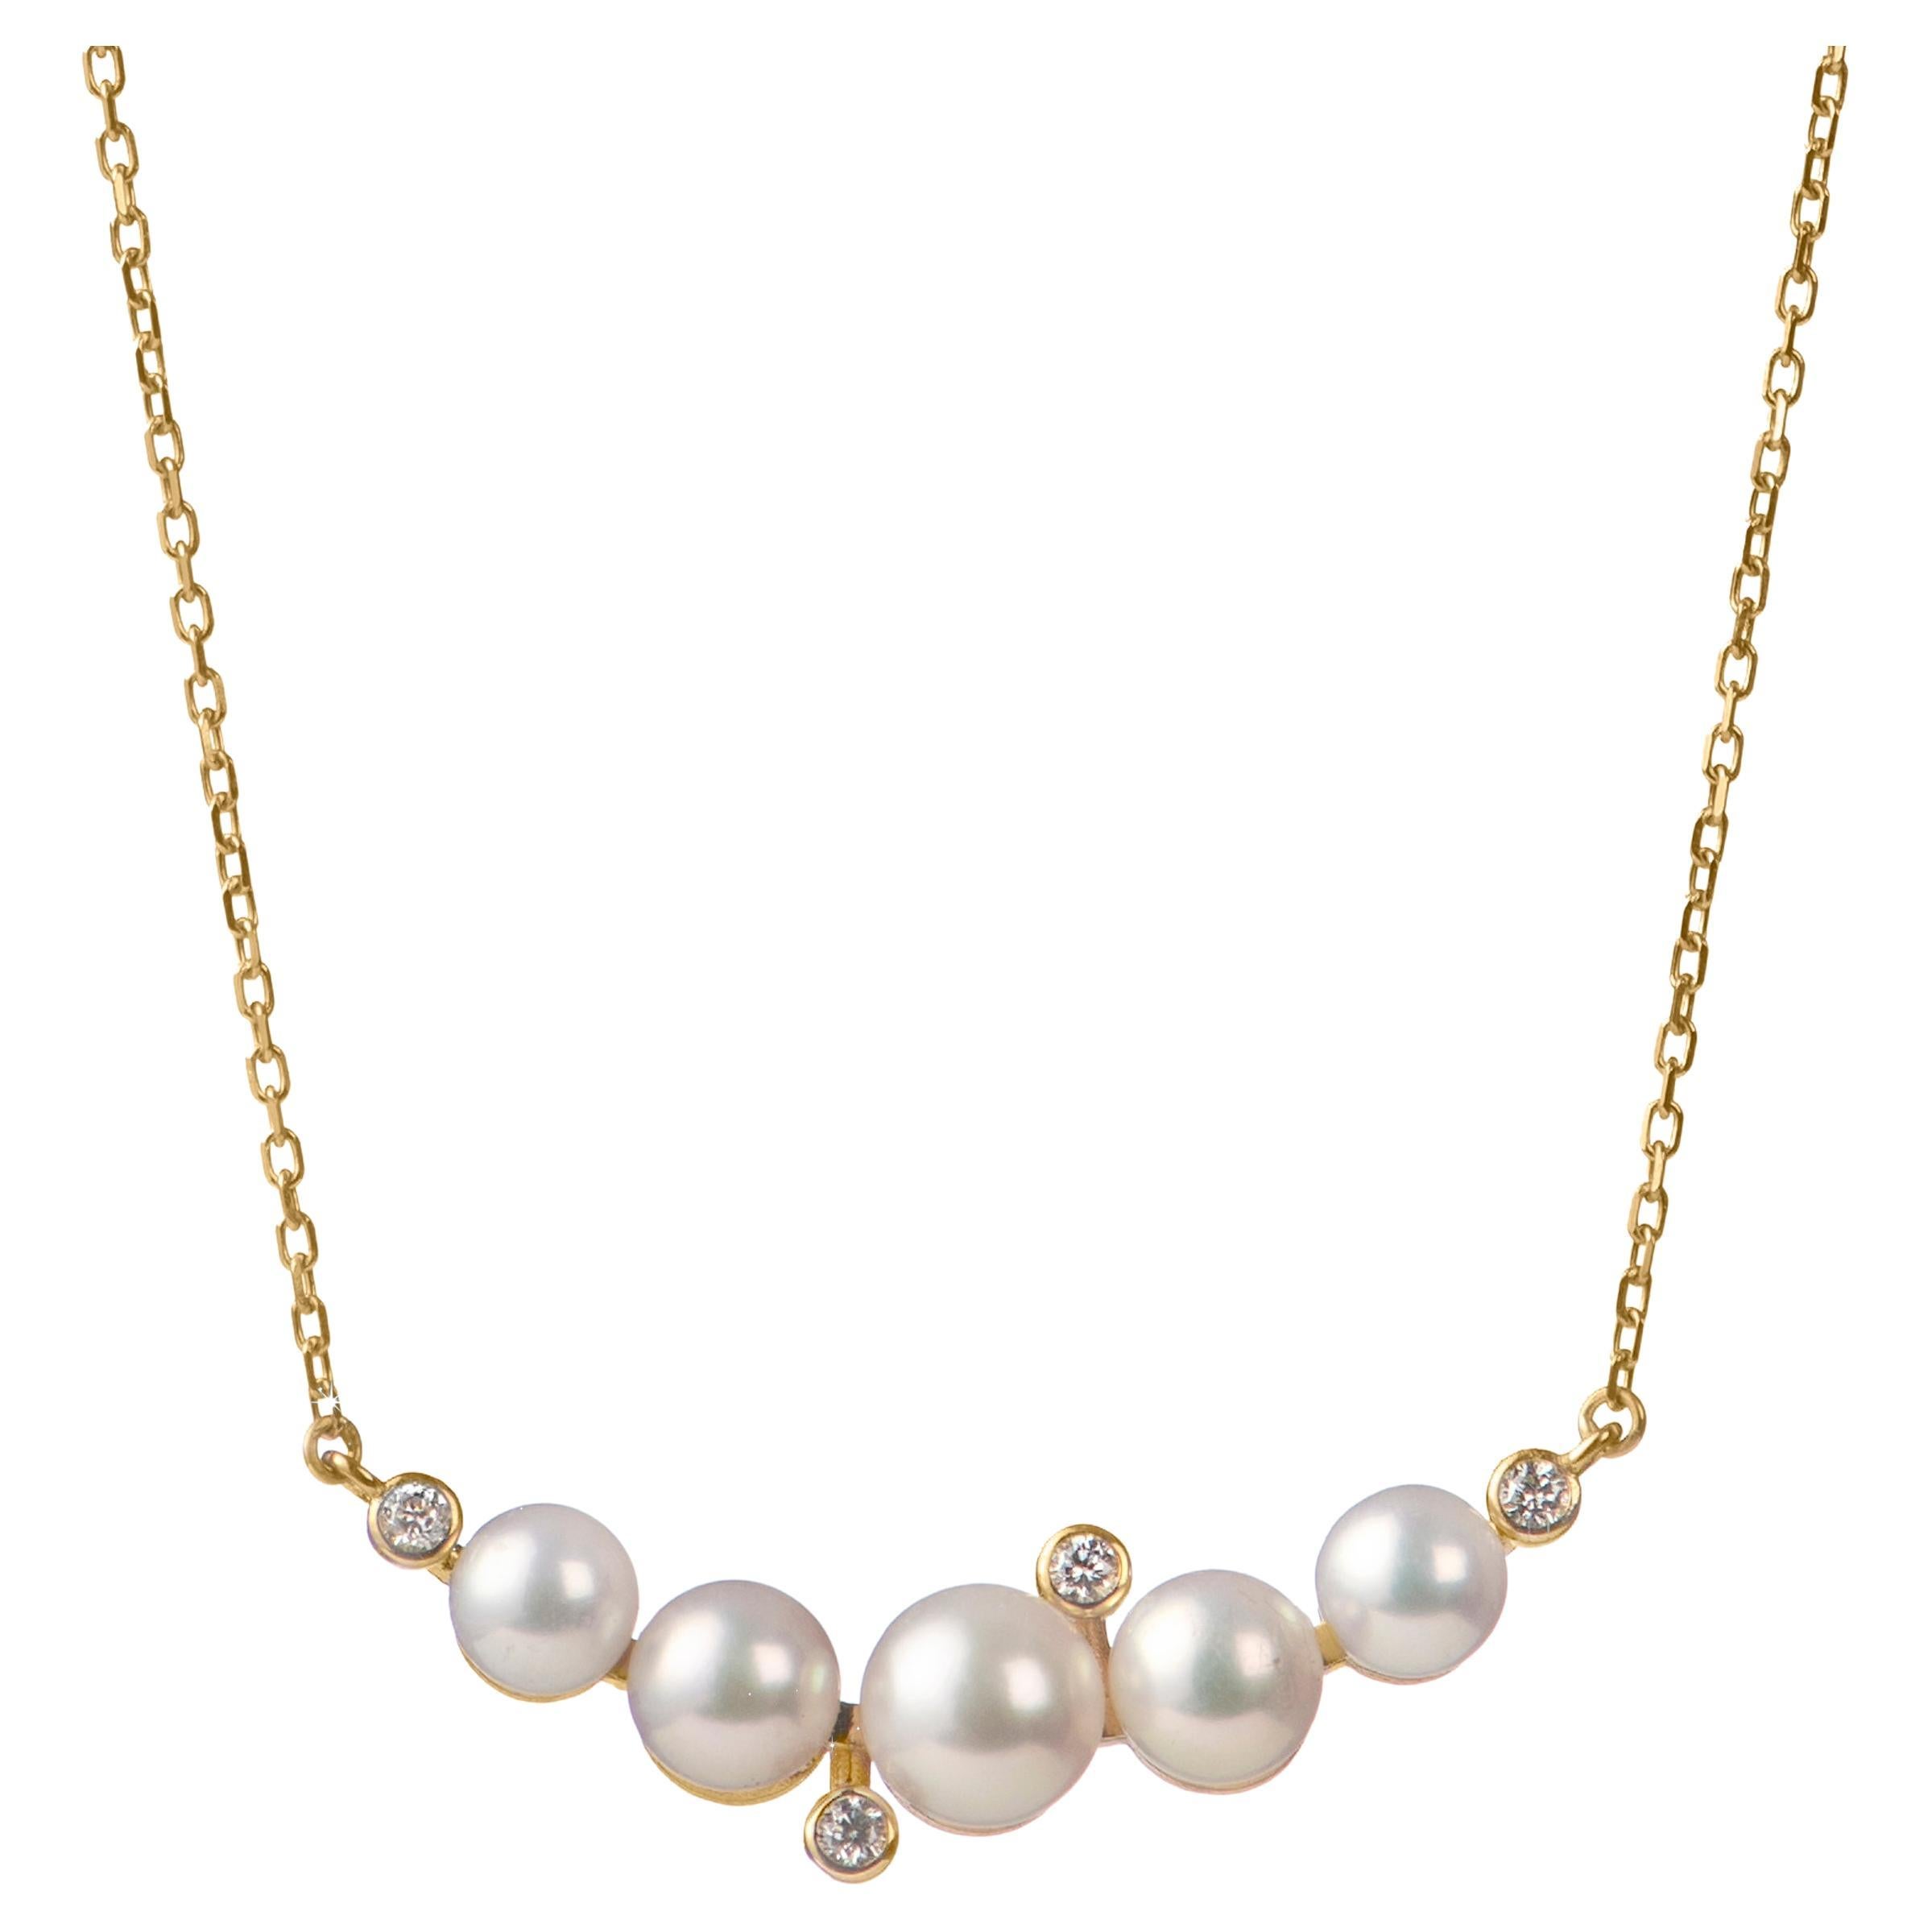 Pearl and diamond necklace, 18k Gold by Michelle Massoura